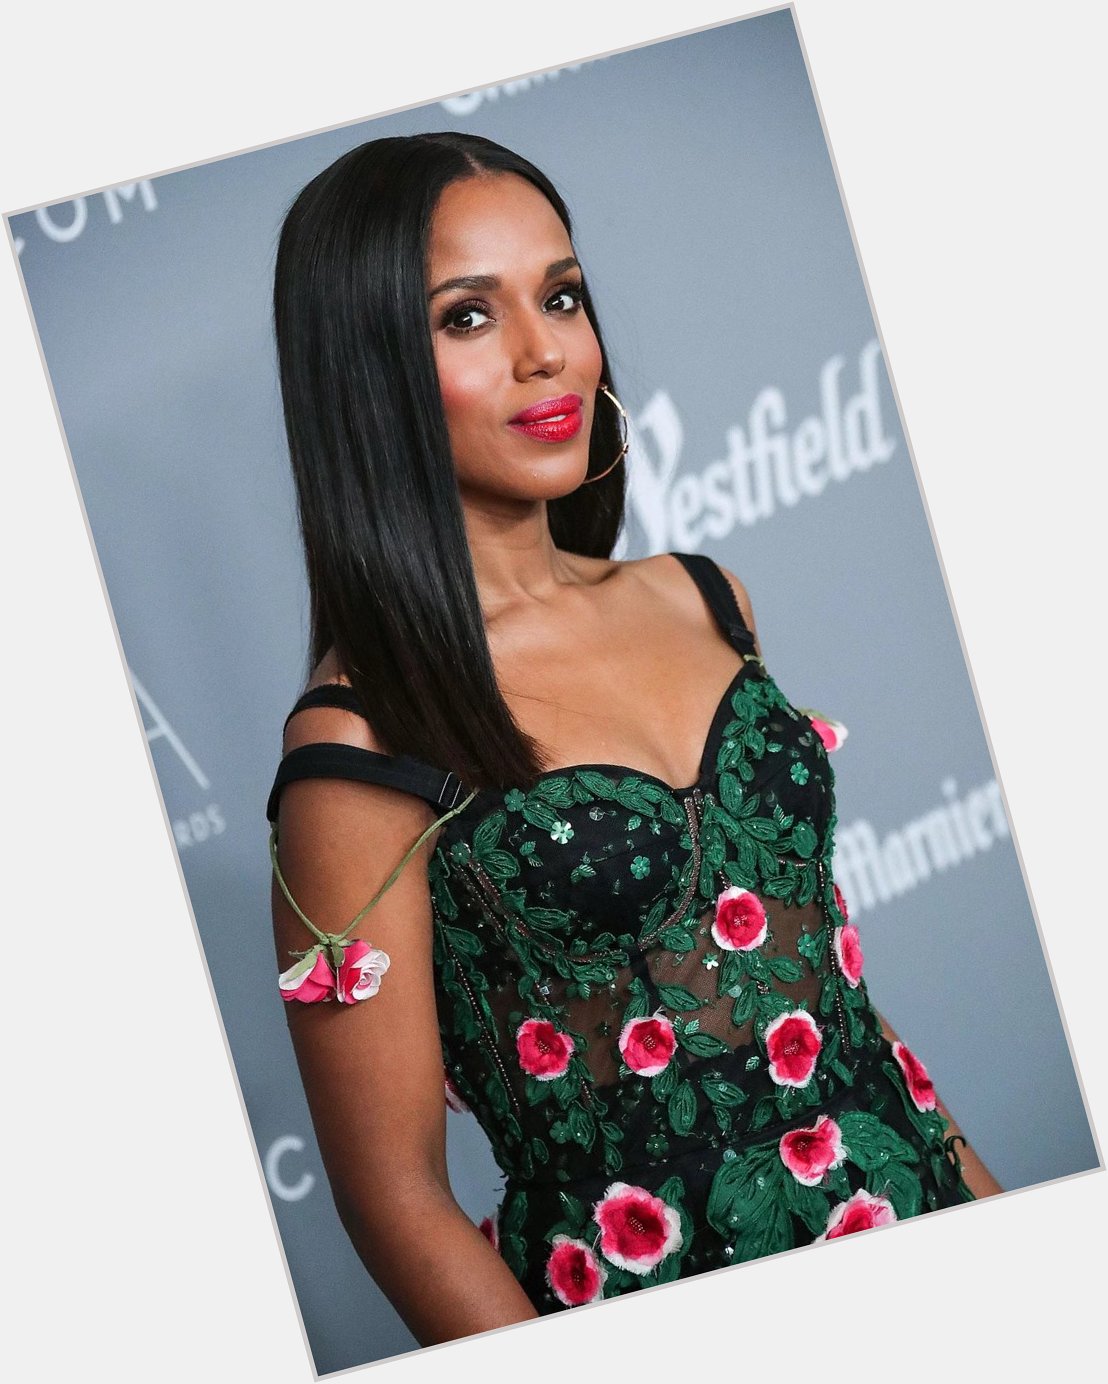 It s the only person who matters birthday. Happy birthday Kerry Washington 